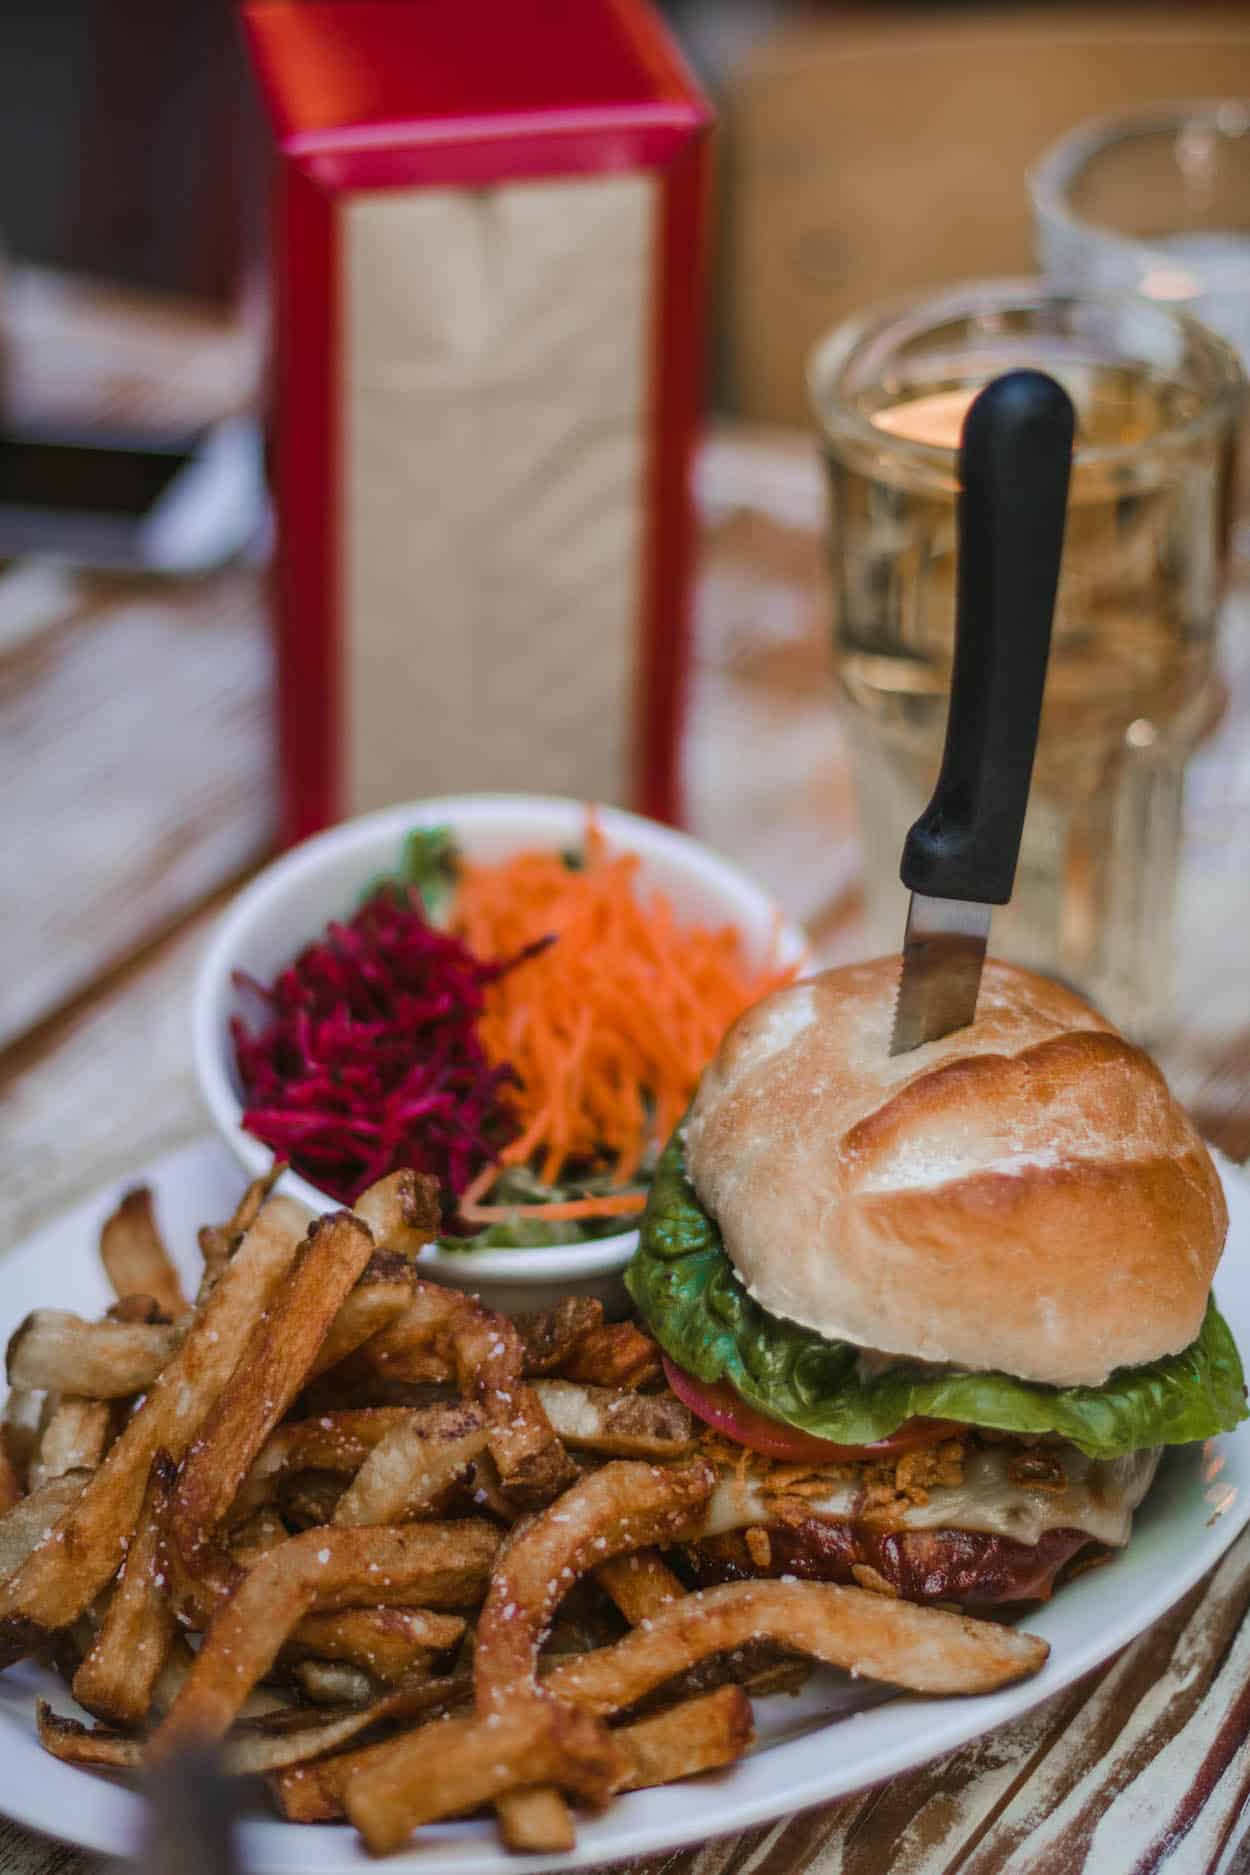 Gastown offers plenty of delicious restaurants and food spots